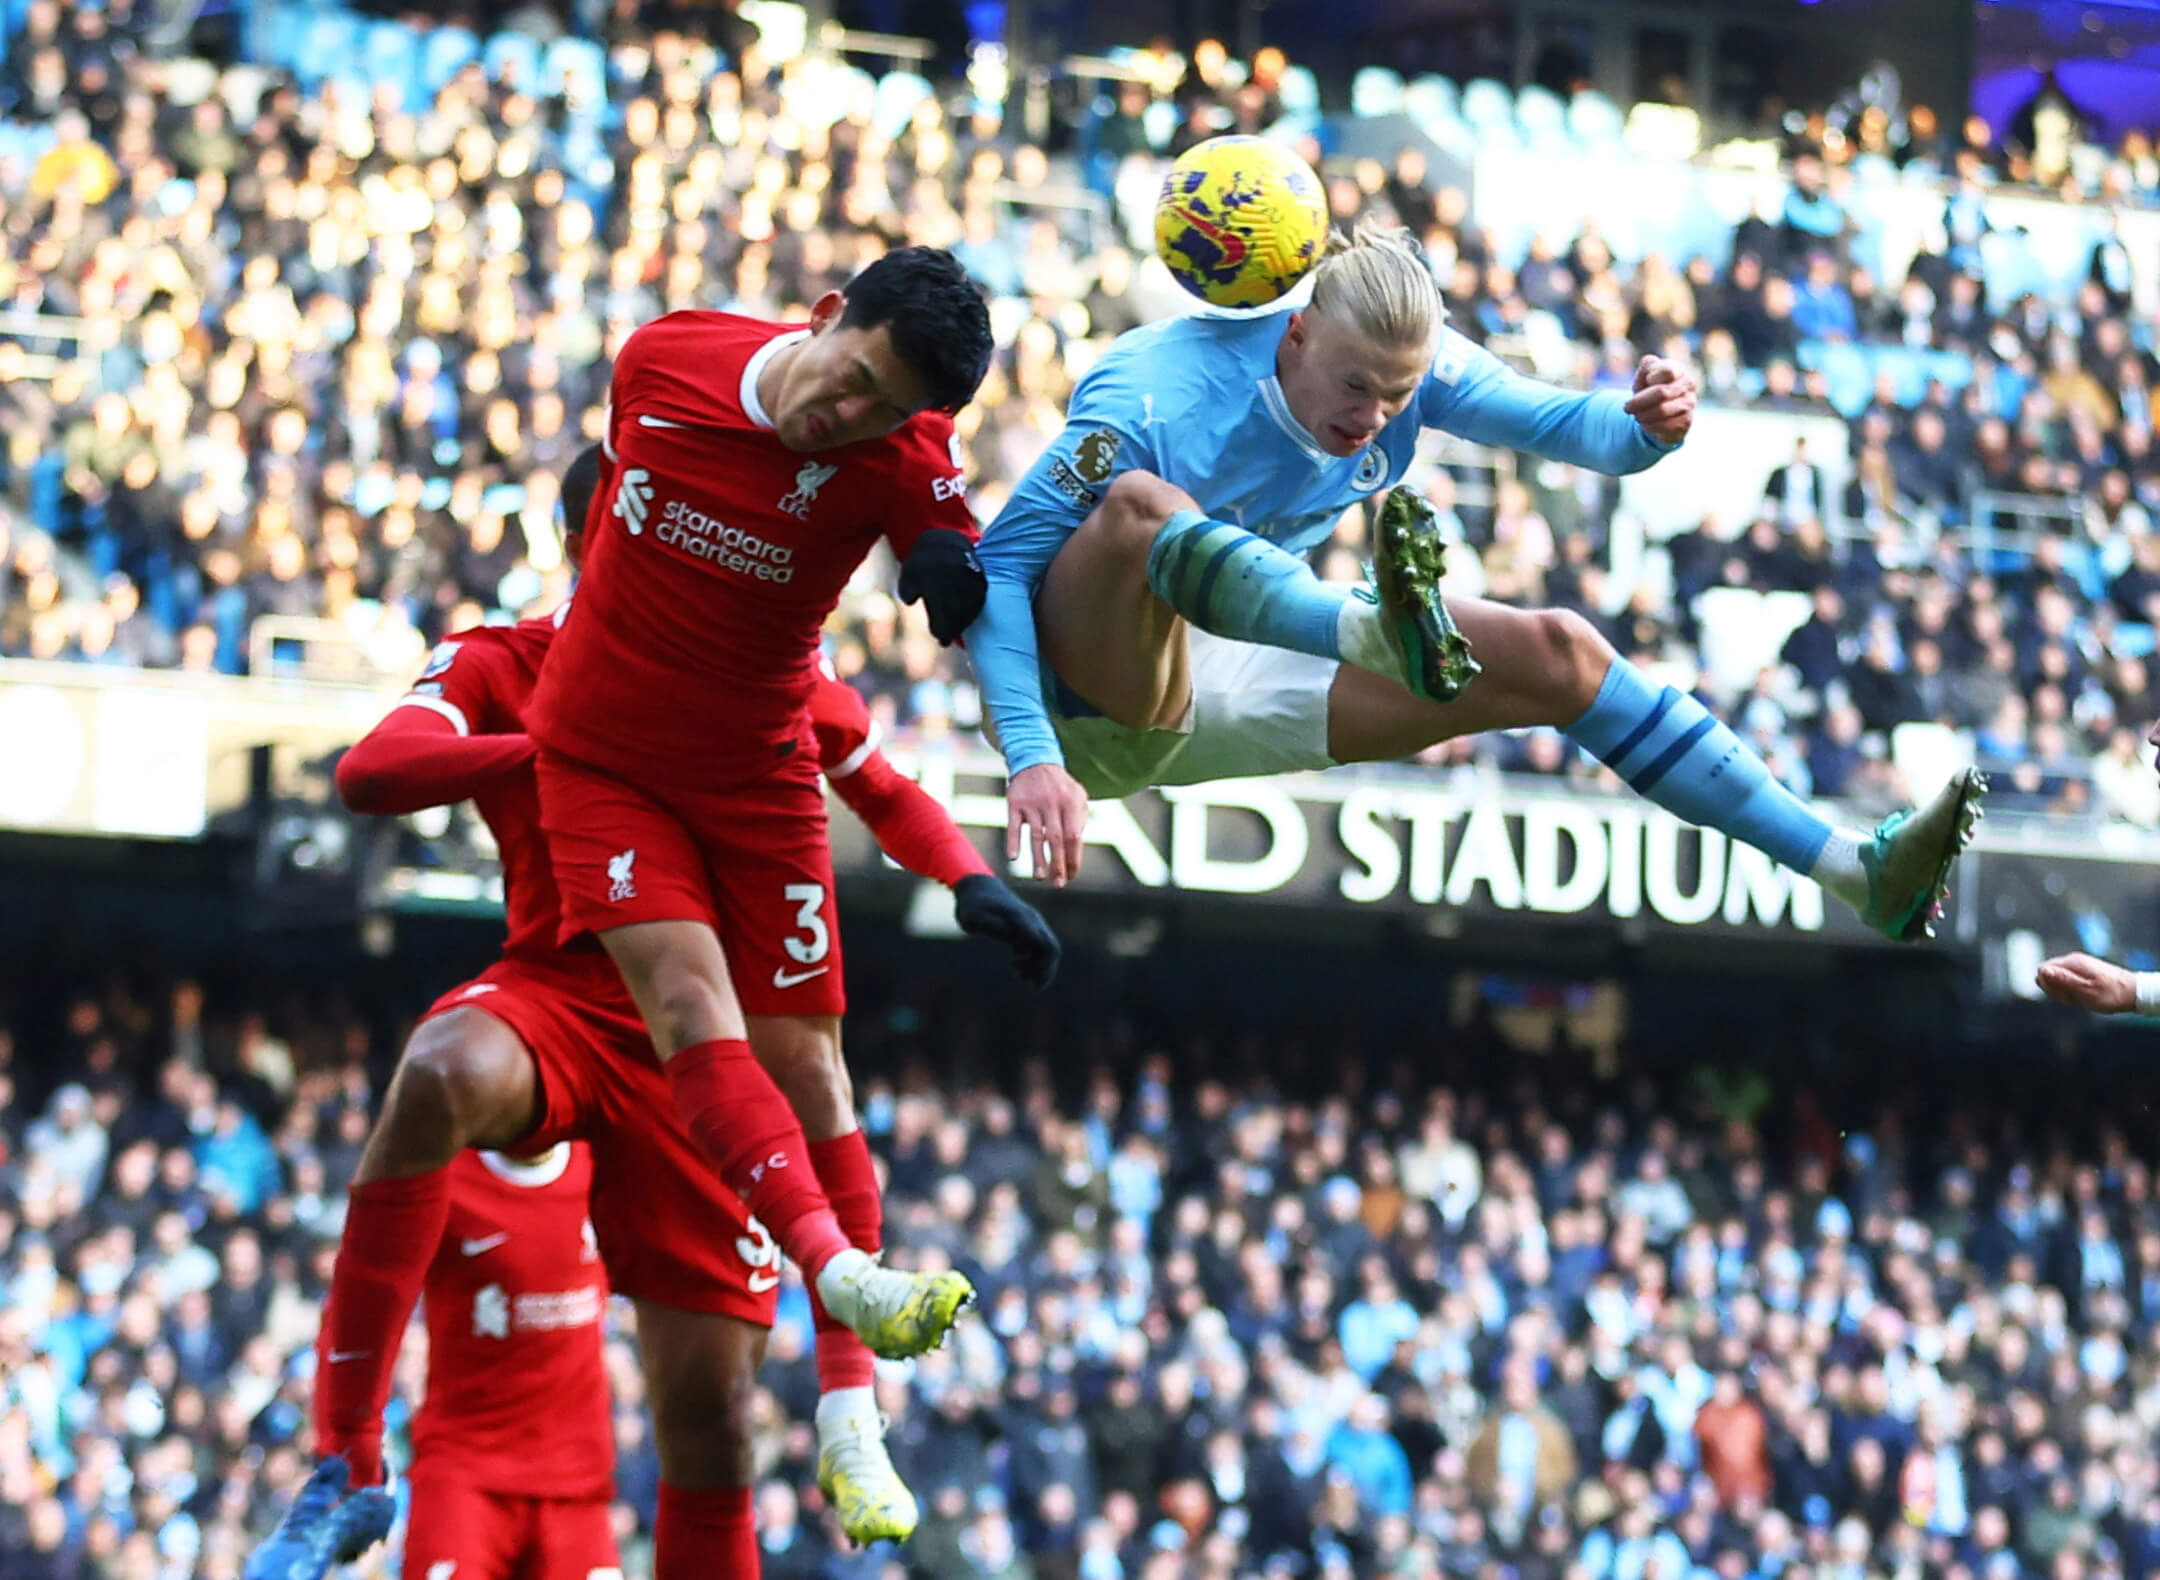 Manchester City drew with Liverpool in the Premier League